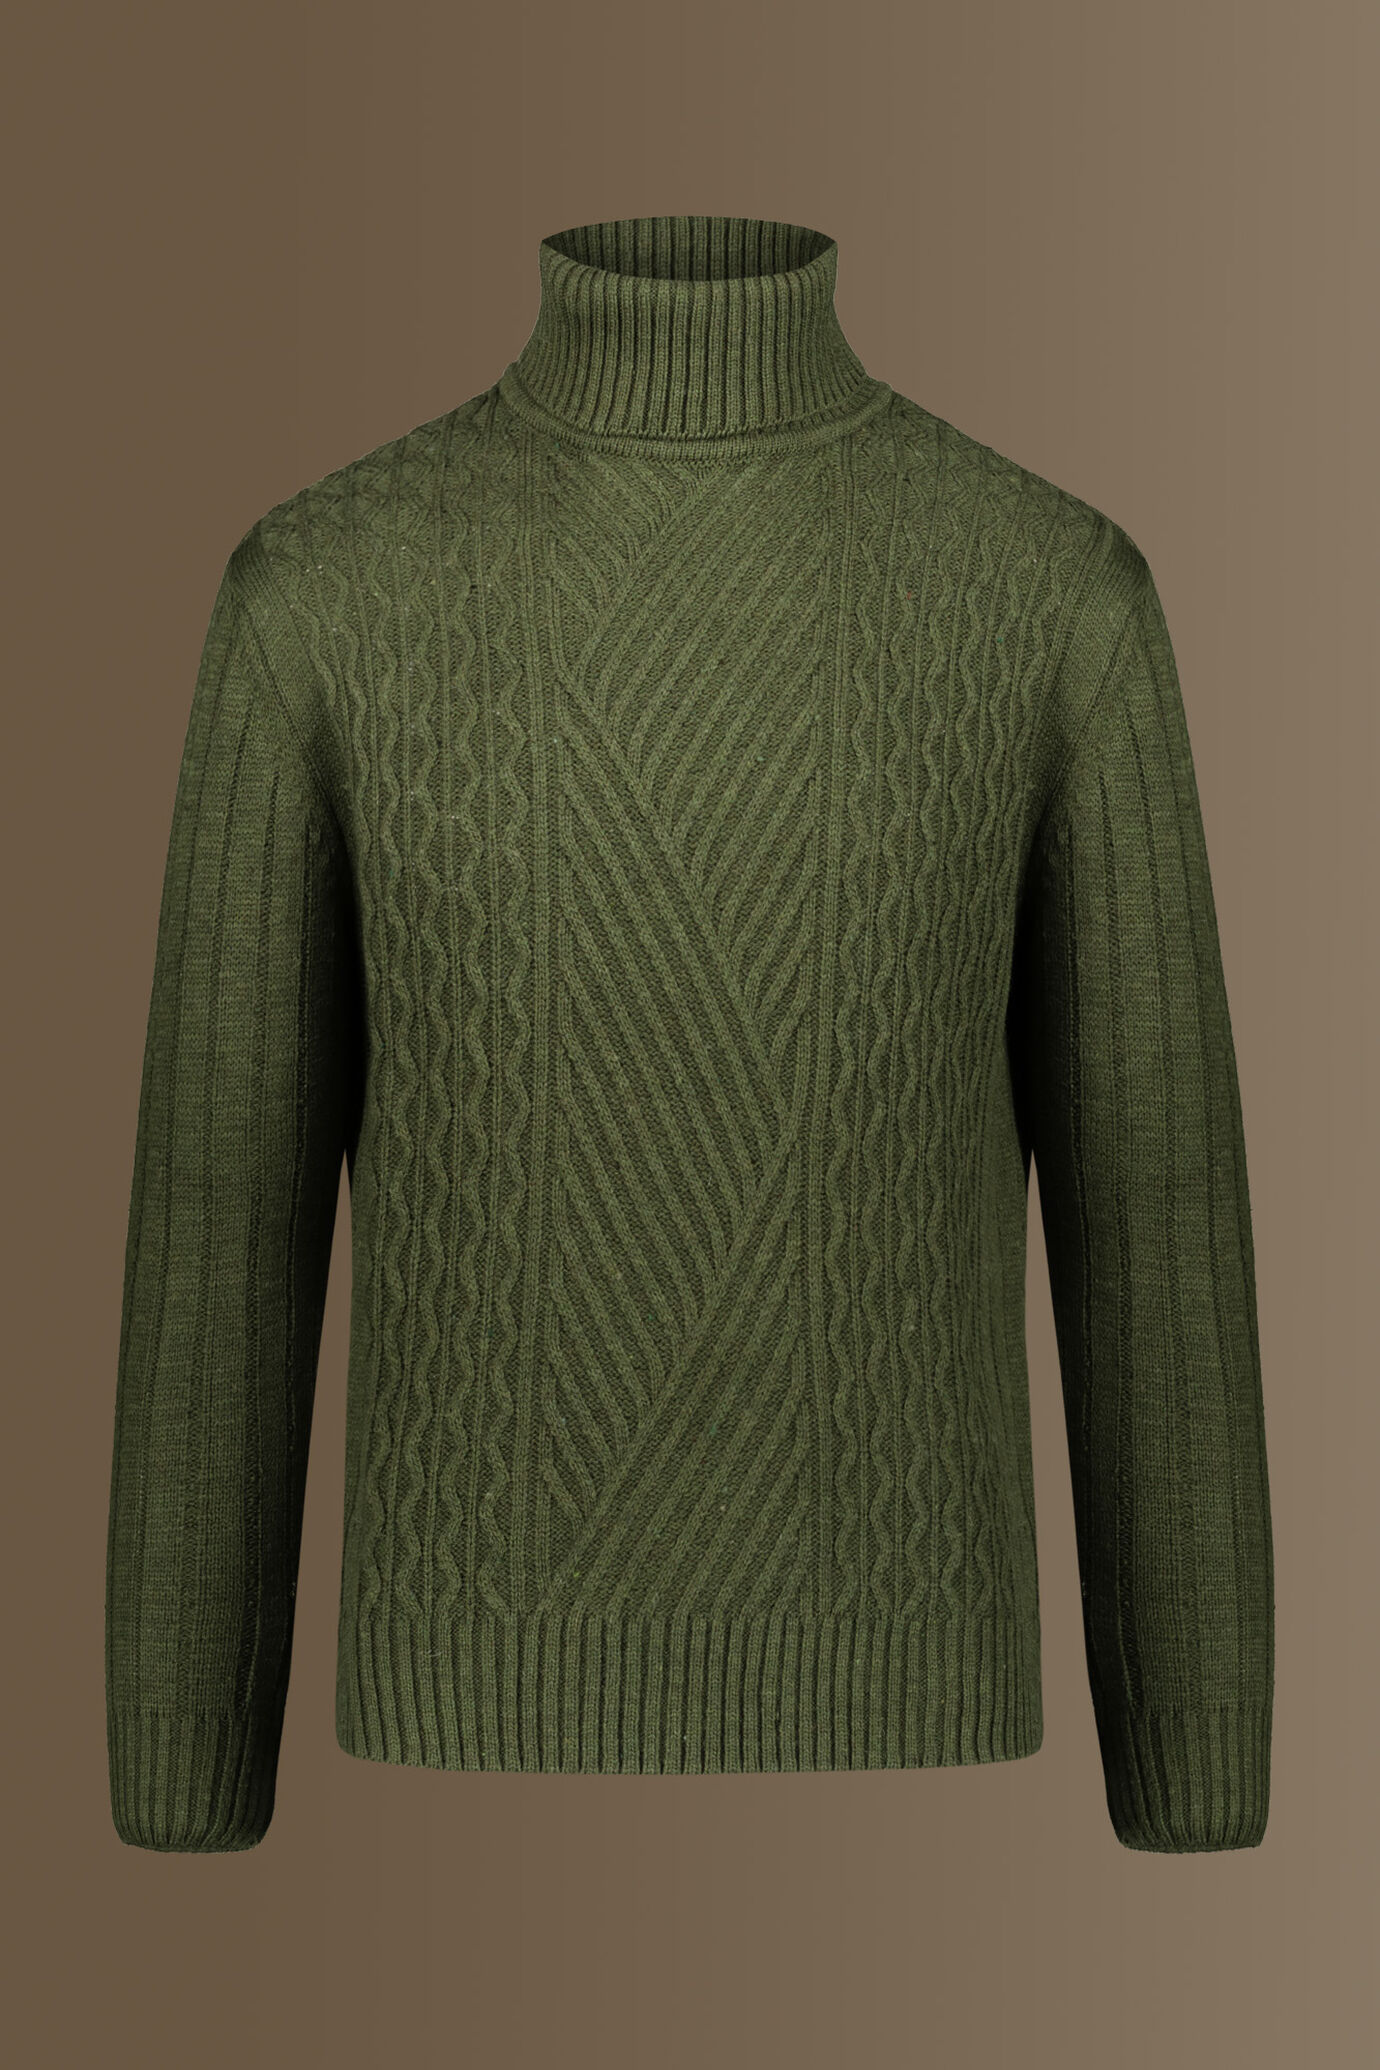 Turtle neck swater, wool blend